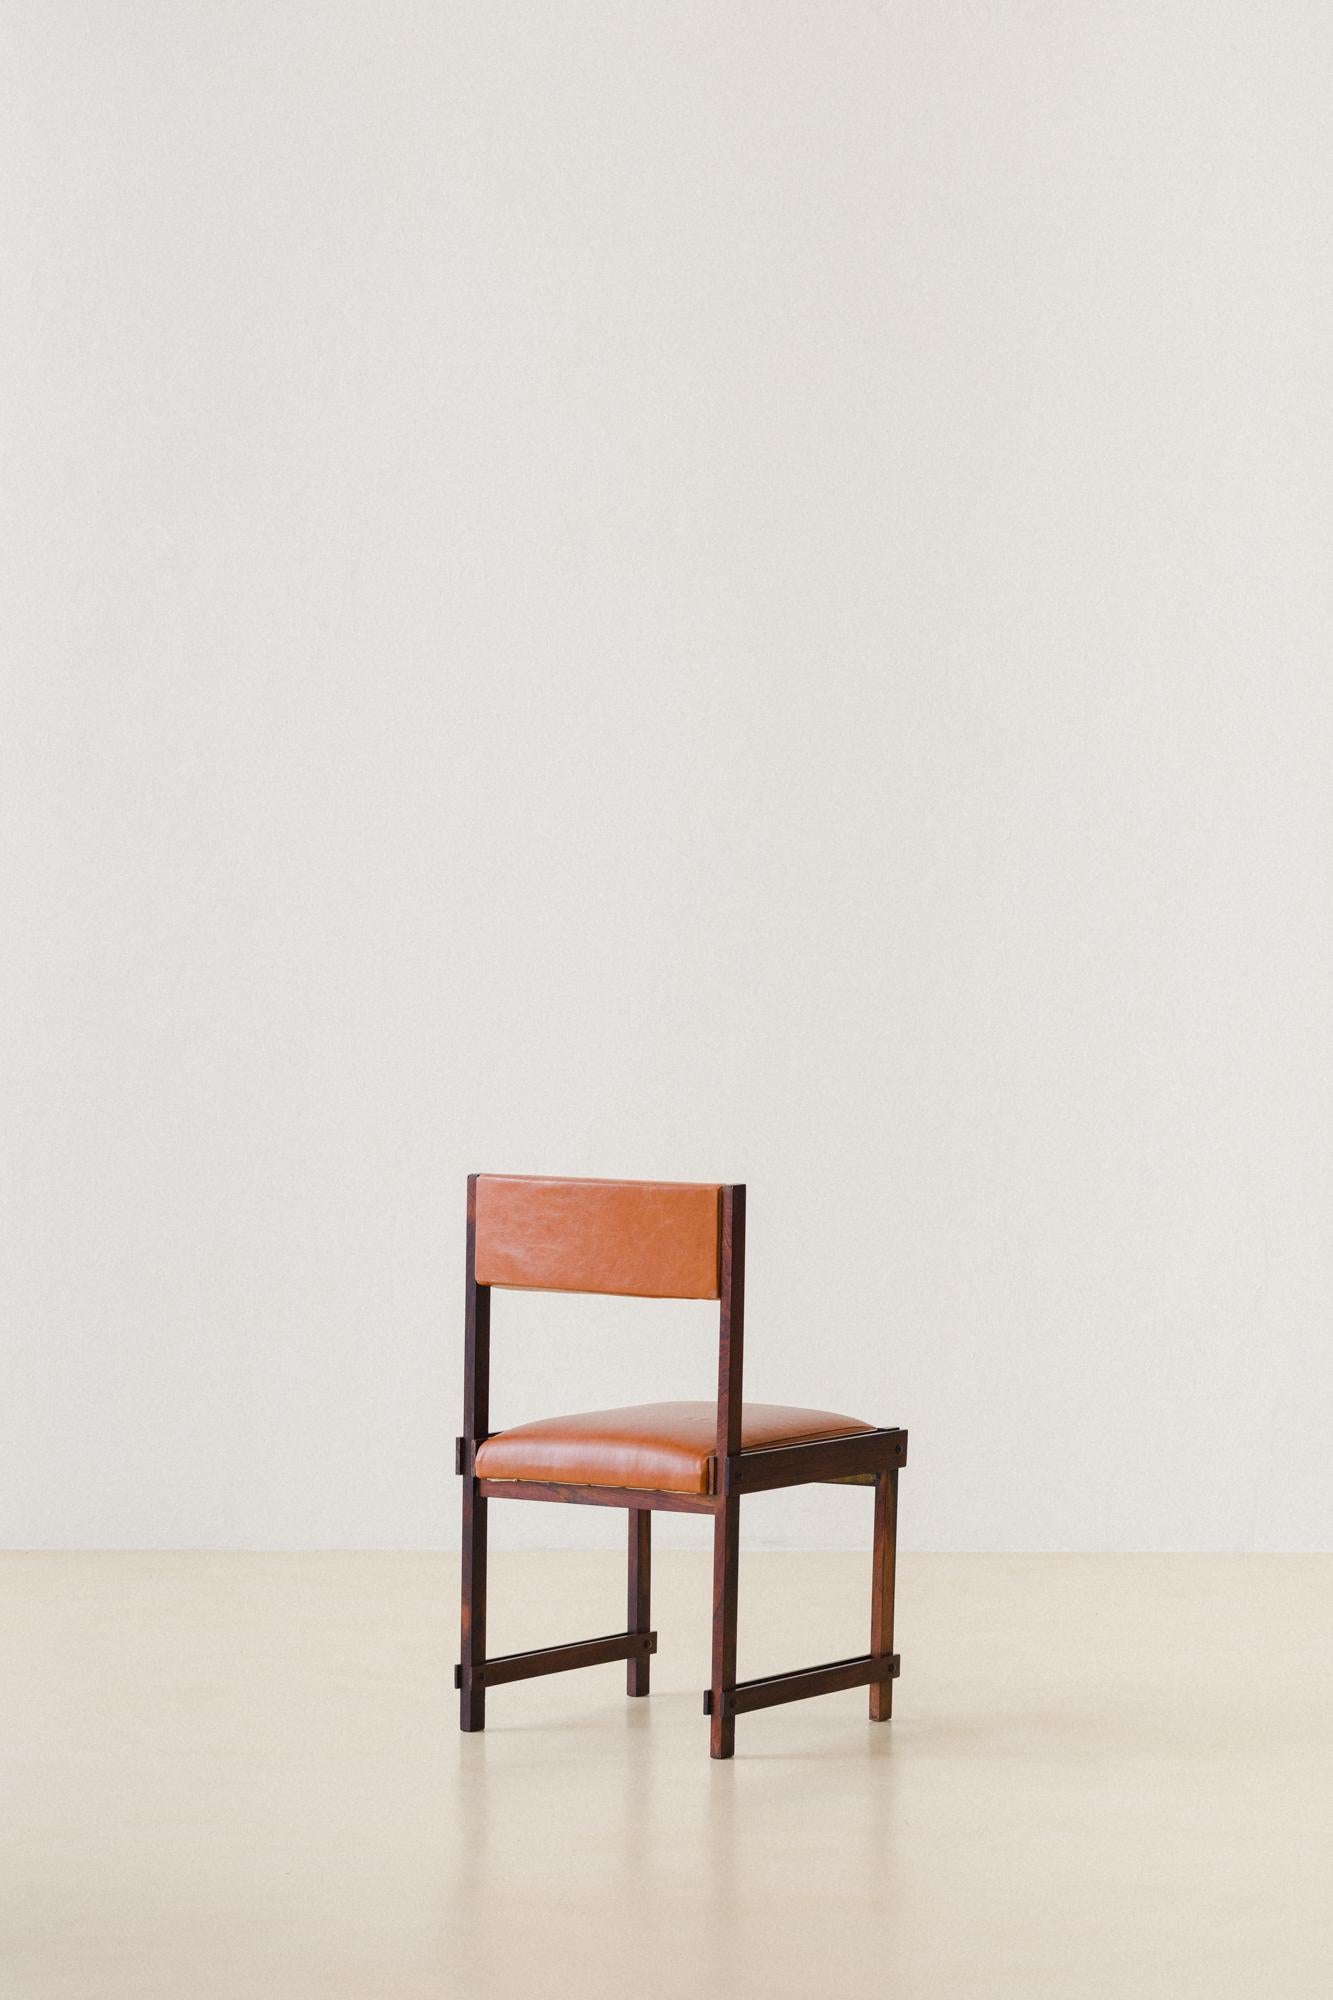 Brazilian Rosewood Dining Chairs by FAI 'Fatima Arquitetura Interiores', 1960s For Sale 5